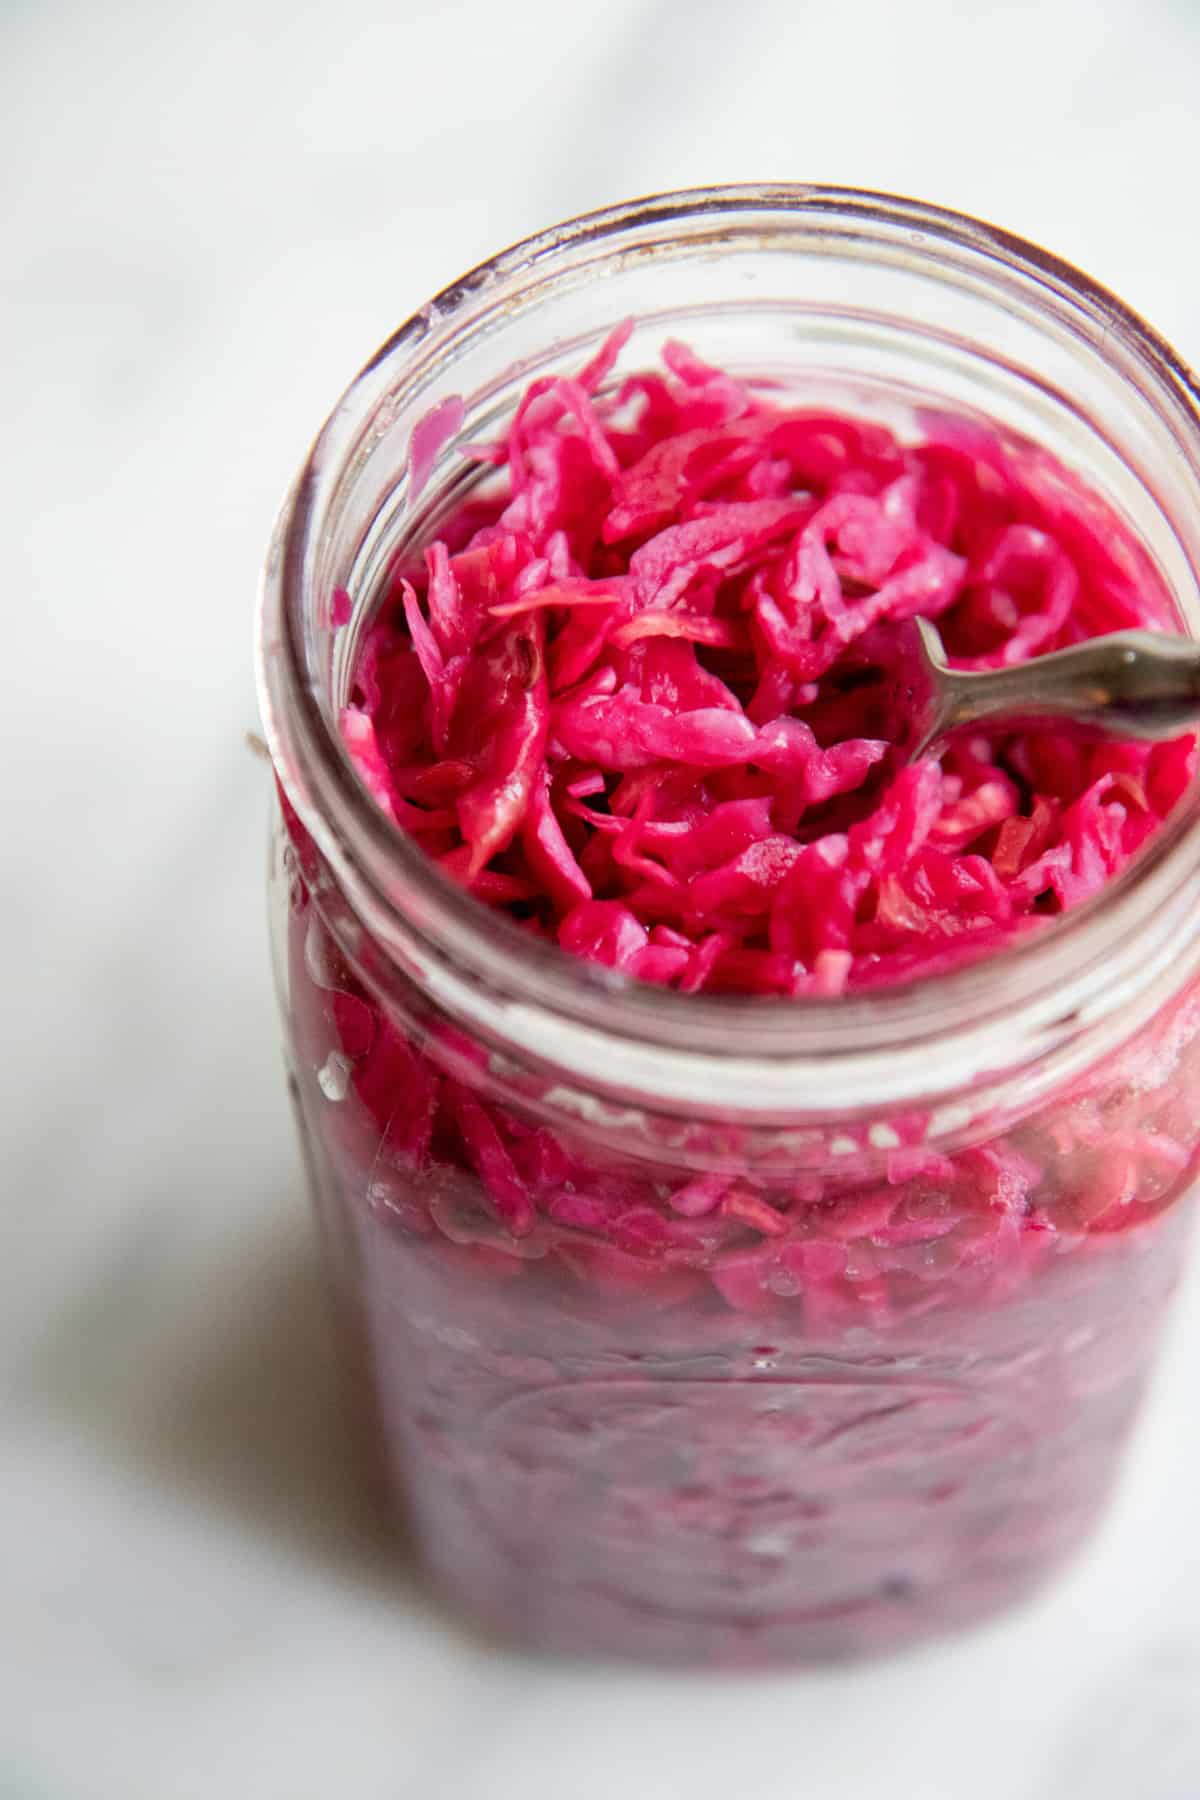 An open jar of finished red sauerkraut, with a fork sitting in the jar.